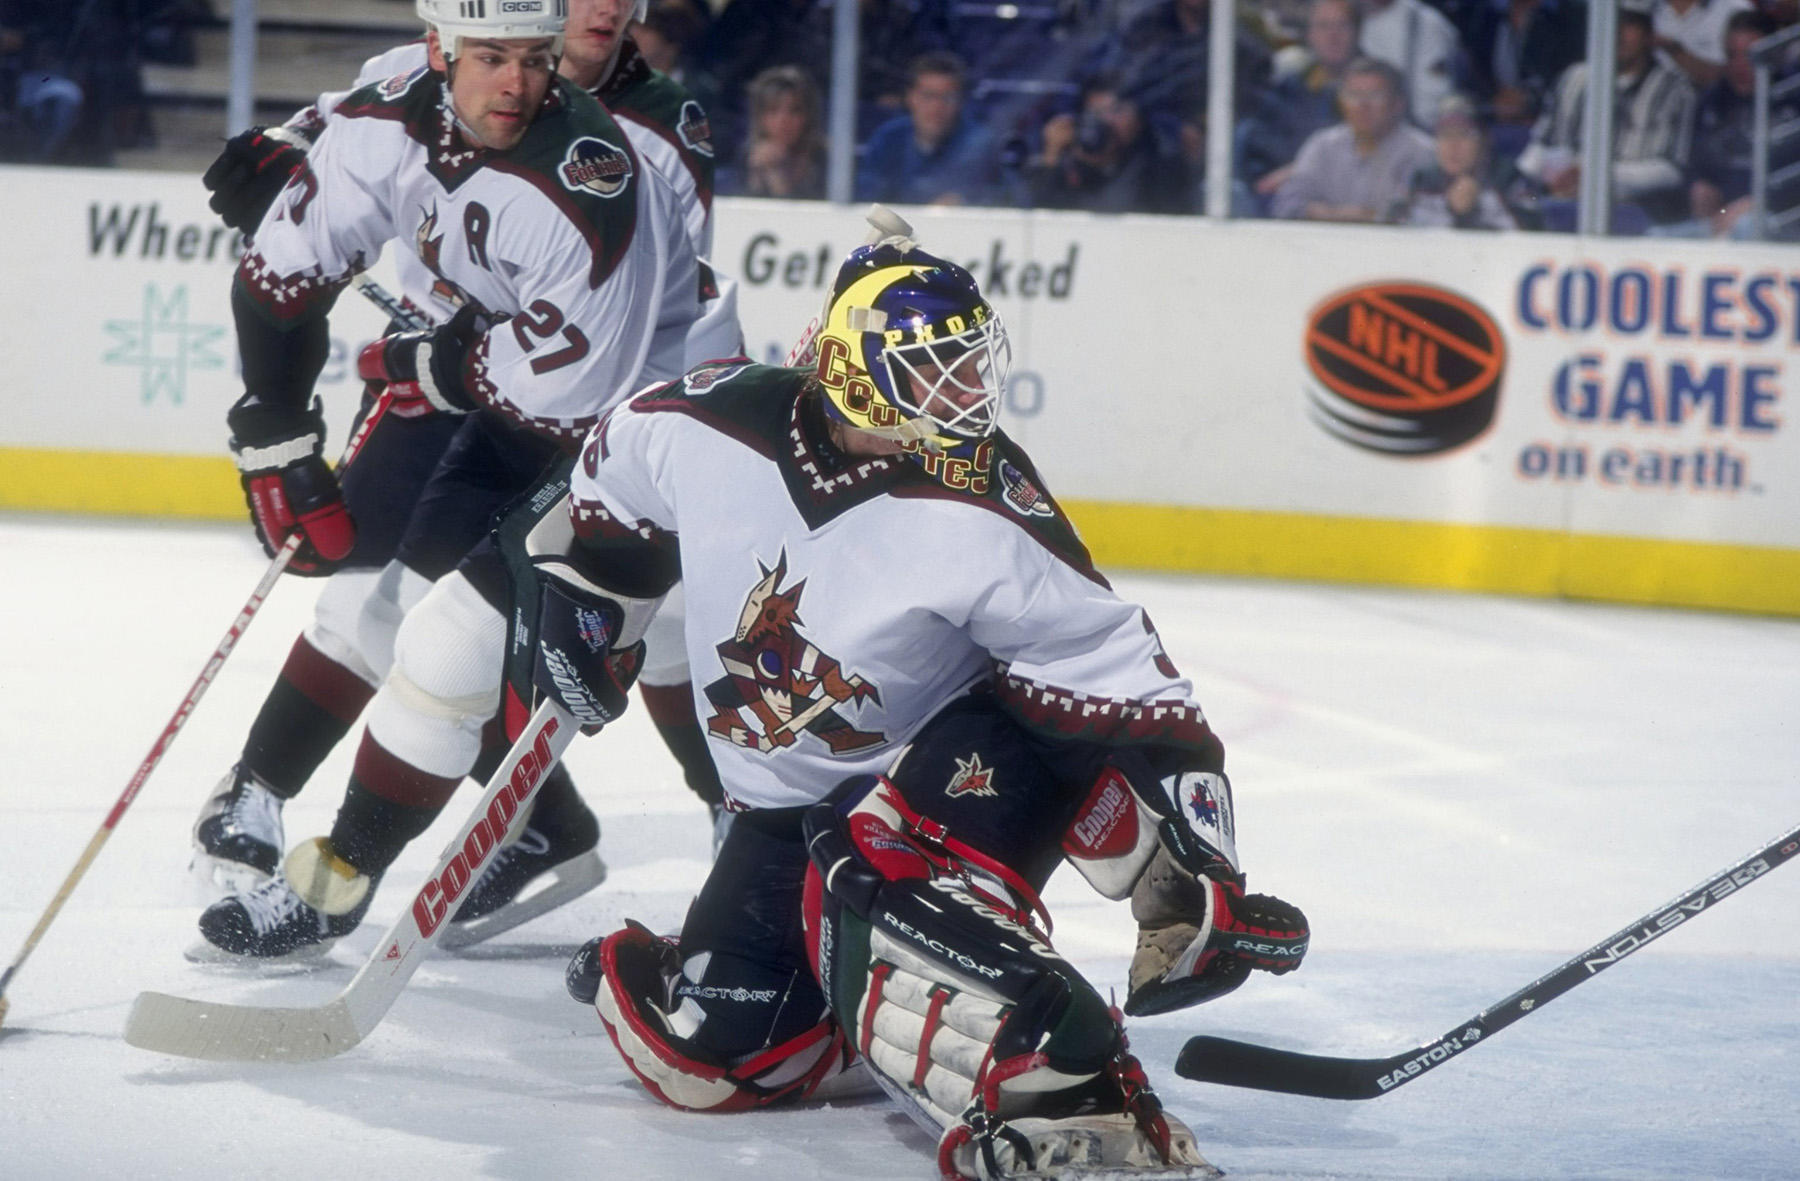 Redrafting the 1996 NHL Draft, the Arizona Coyotes' first-ever